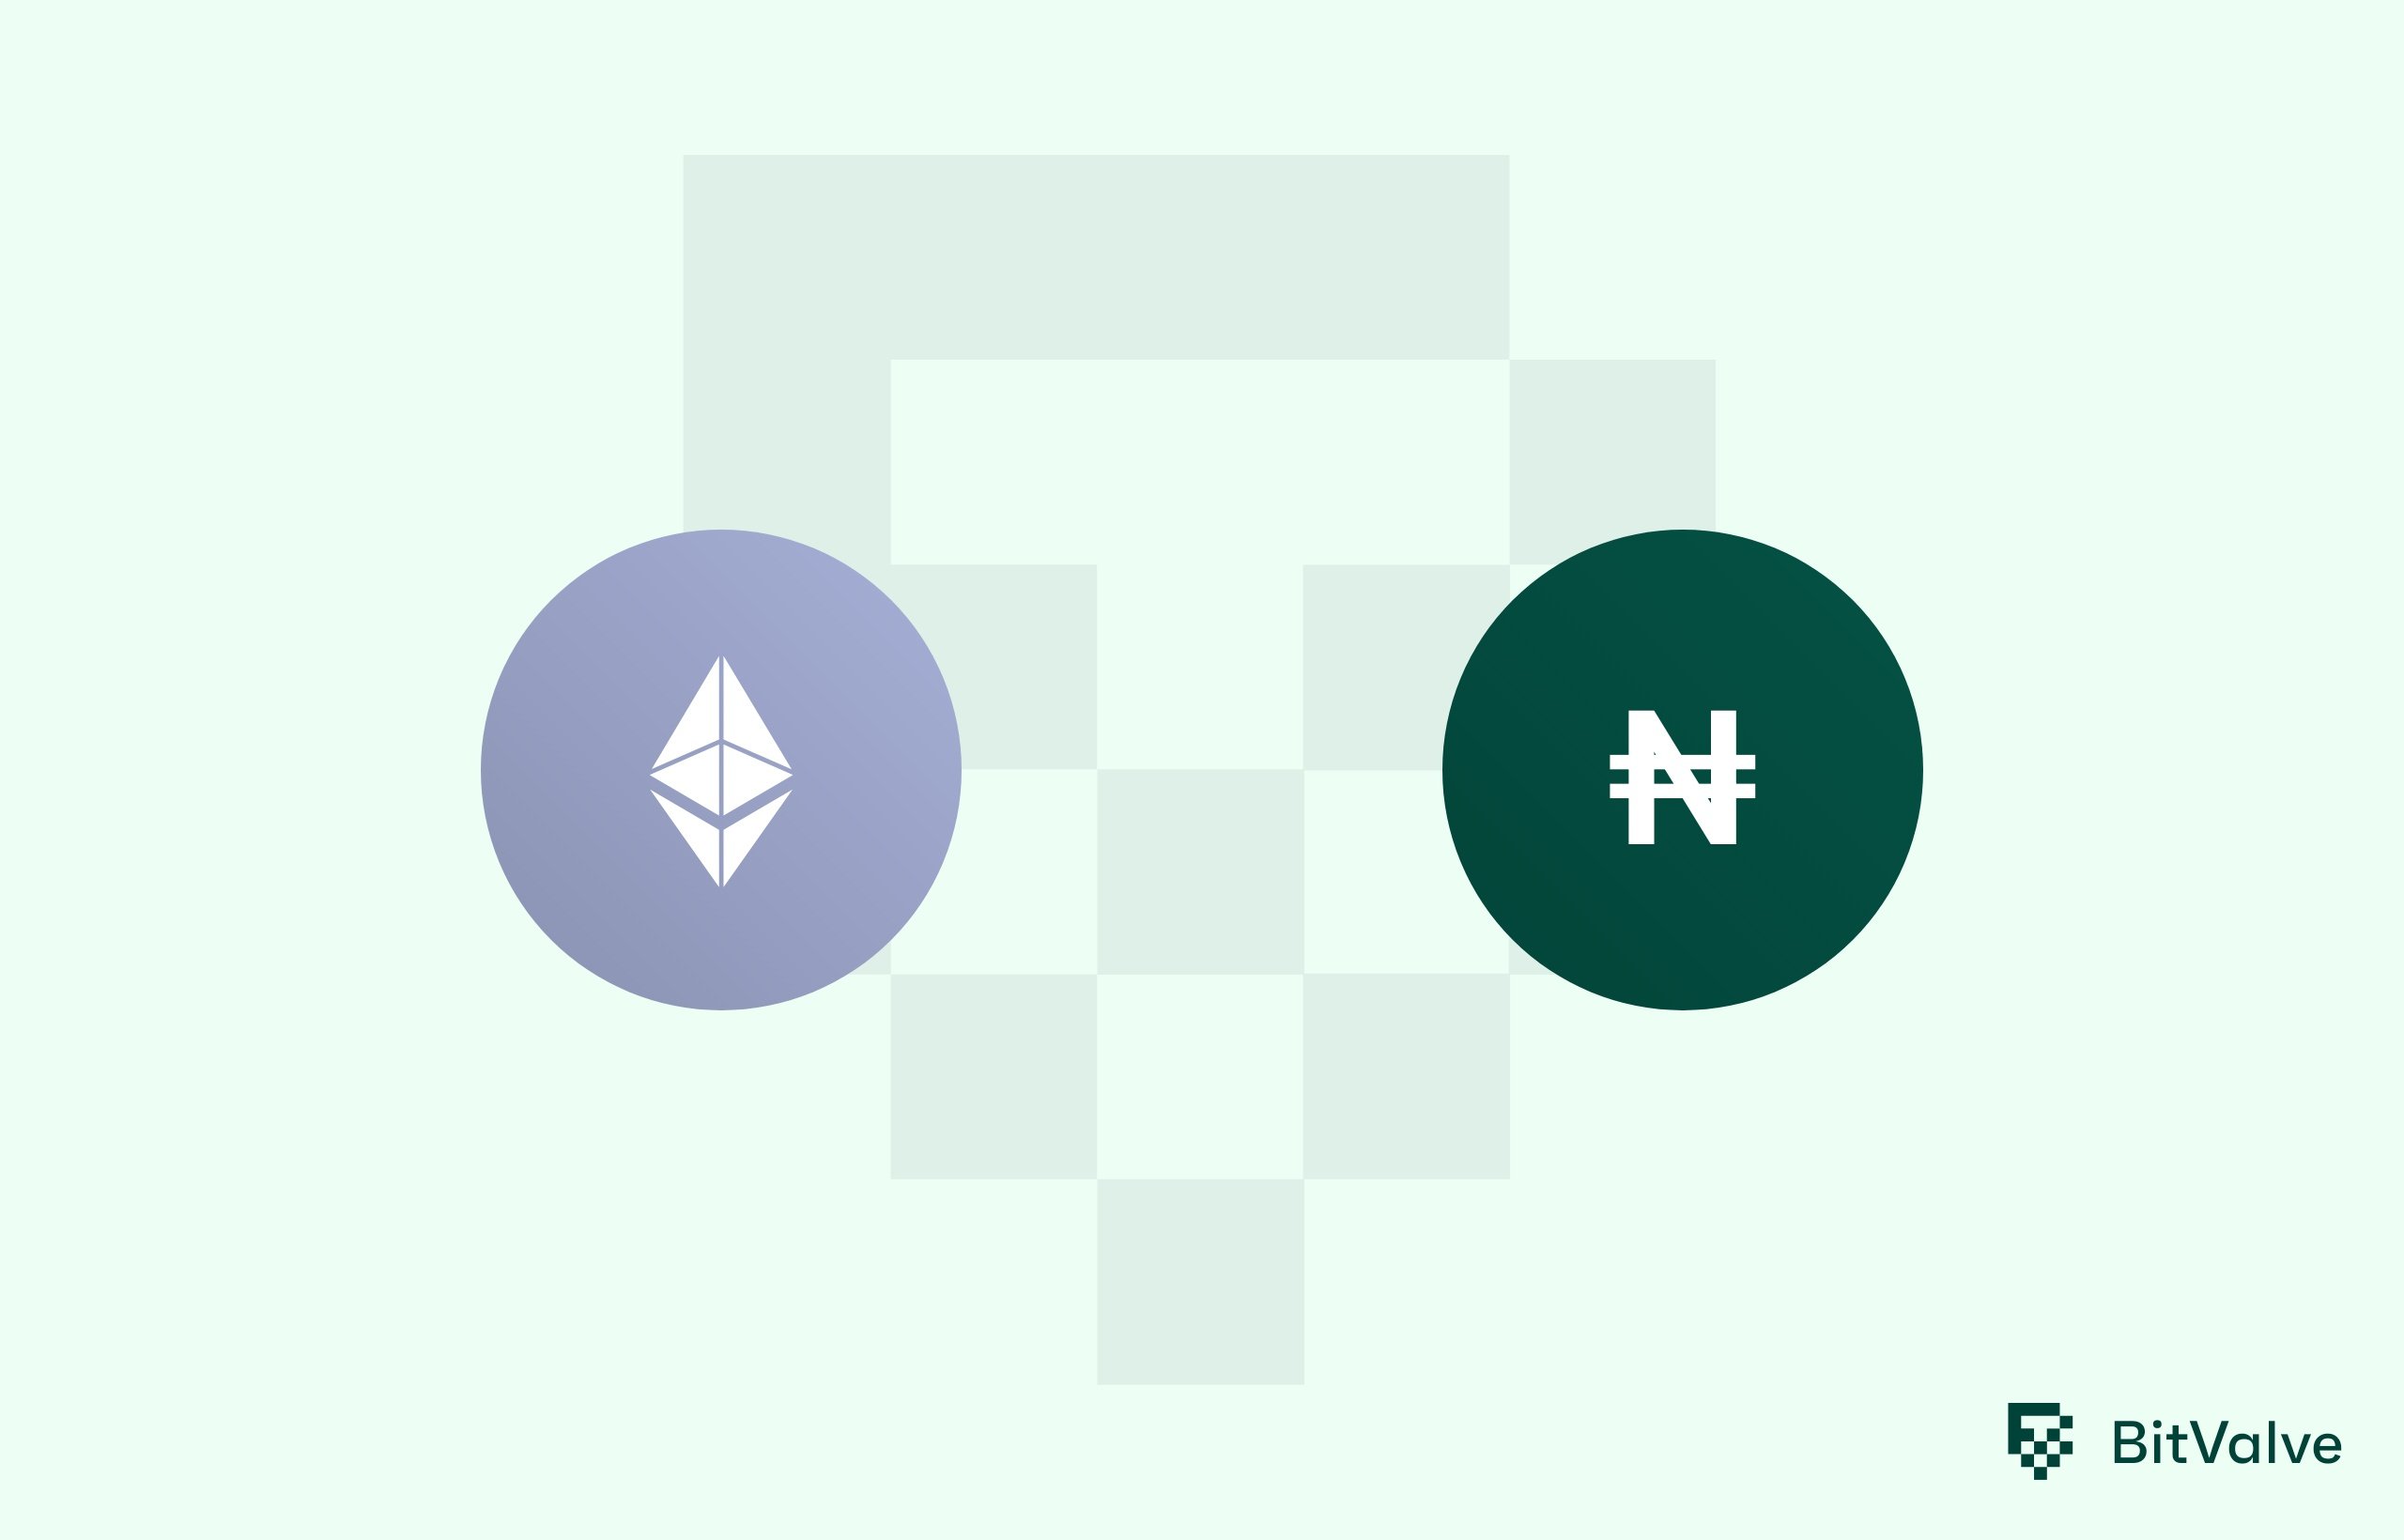 Convert Ethereum to Nigerian Naira | ETH to NGN currency converter - Valuta EX